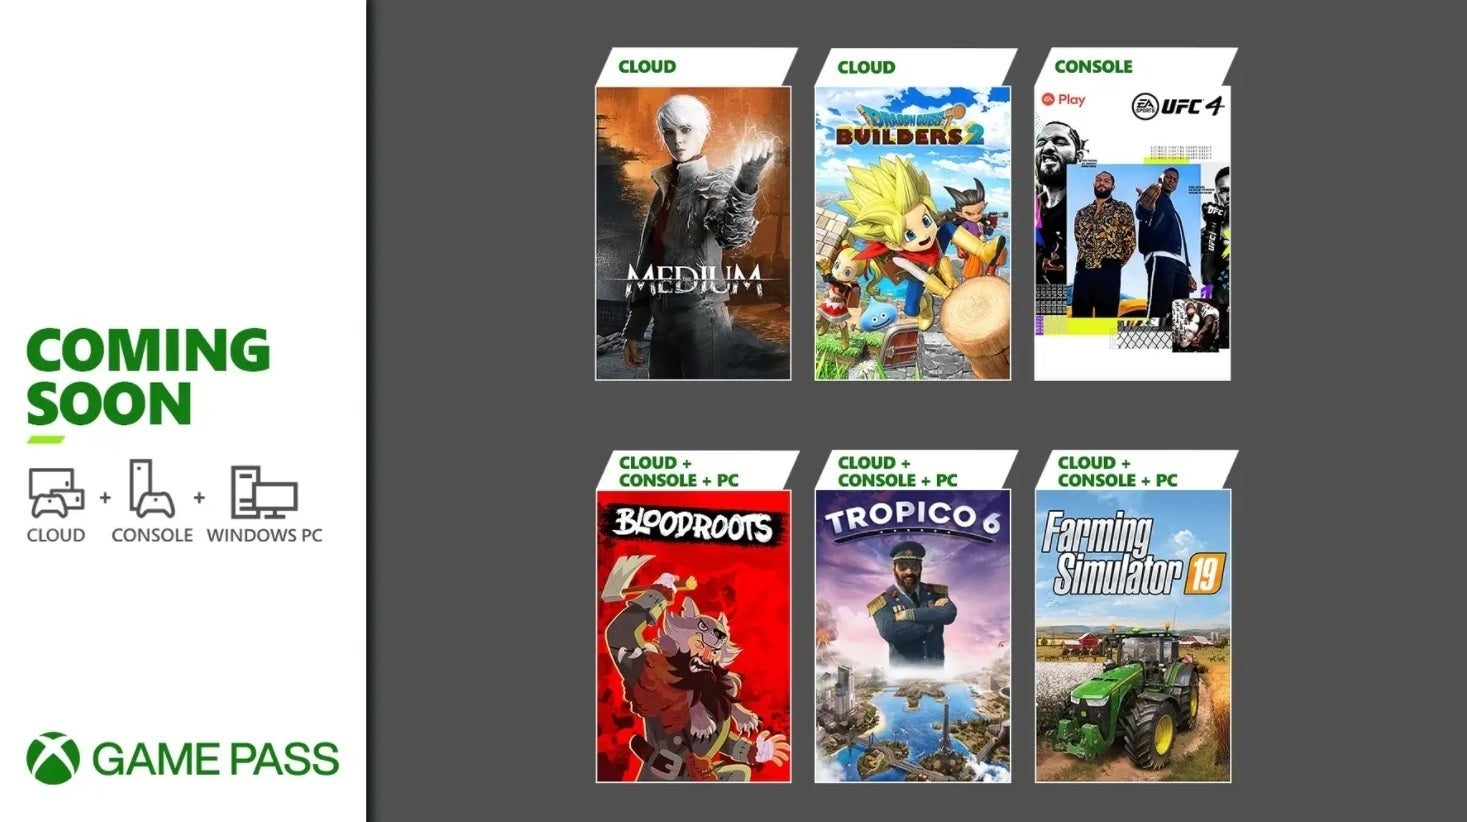 Image for Microsoft announces games coming soon to Xbox Game Pass